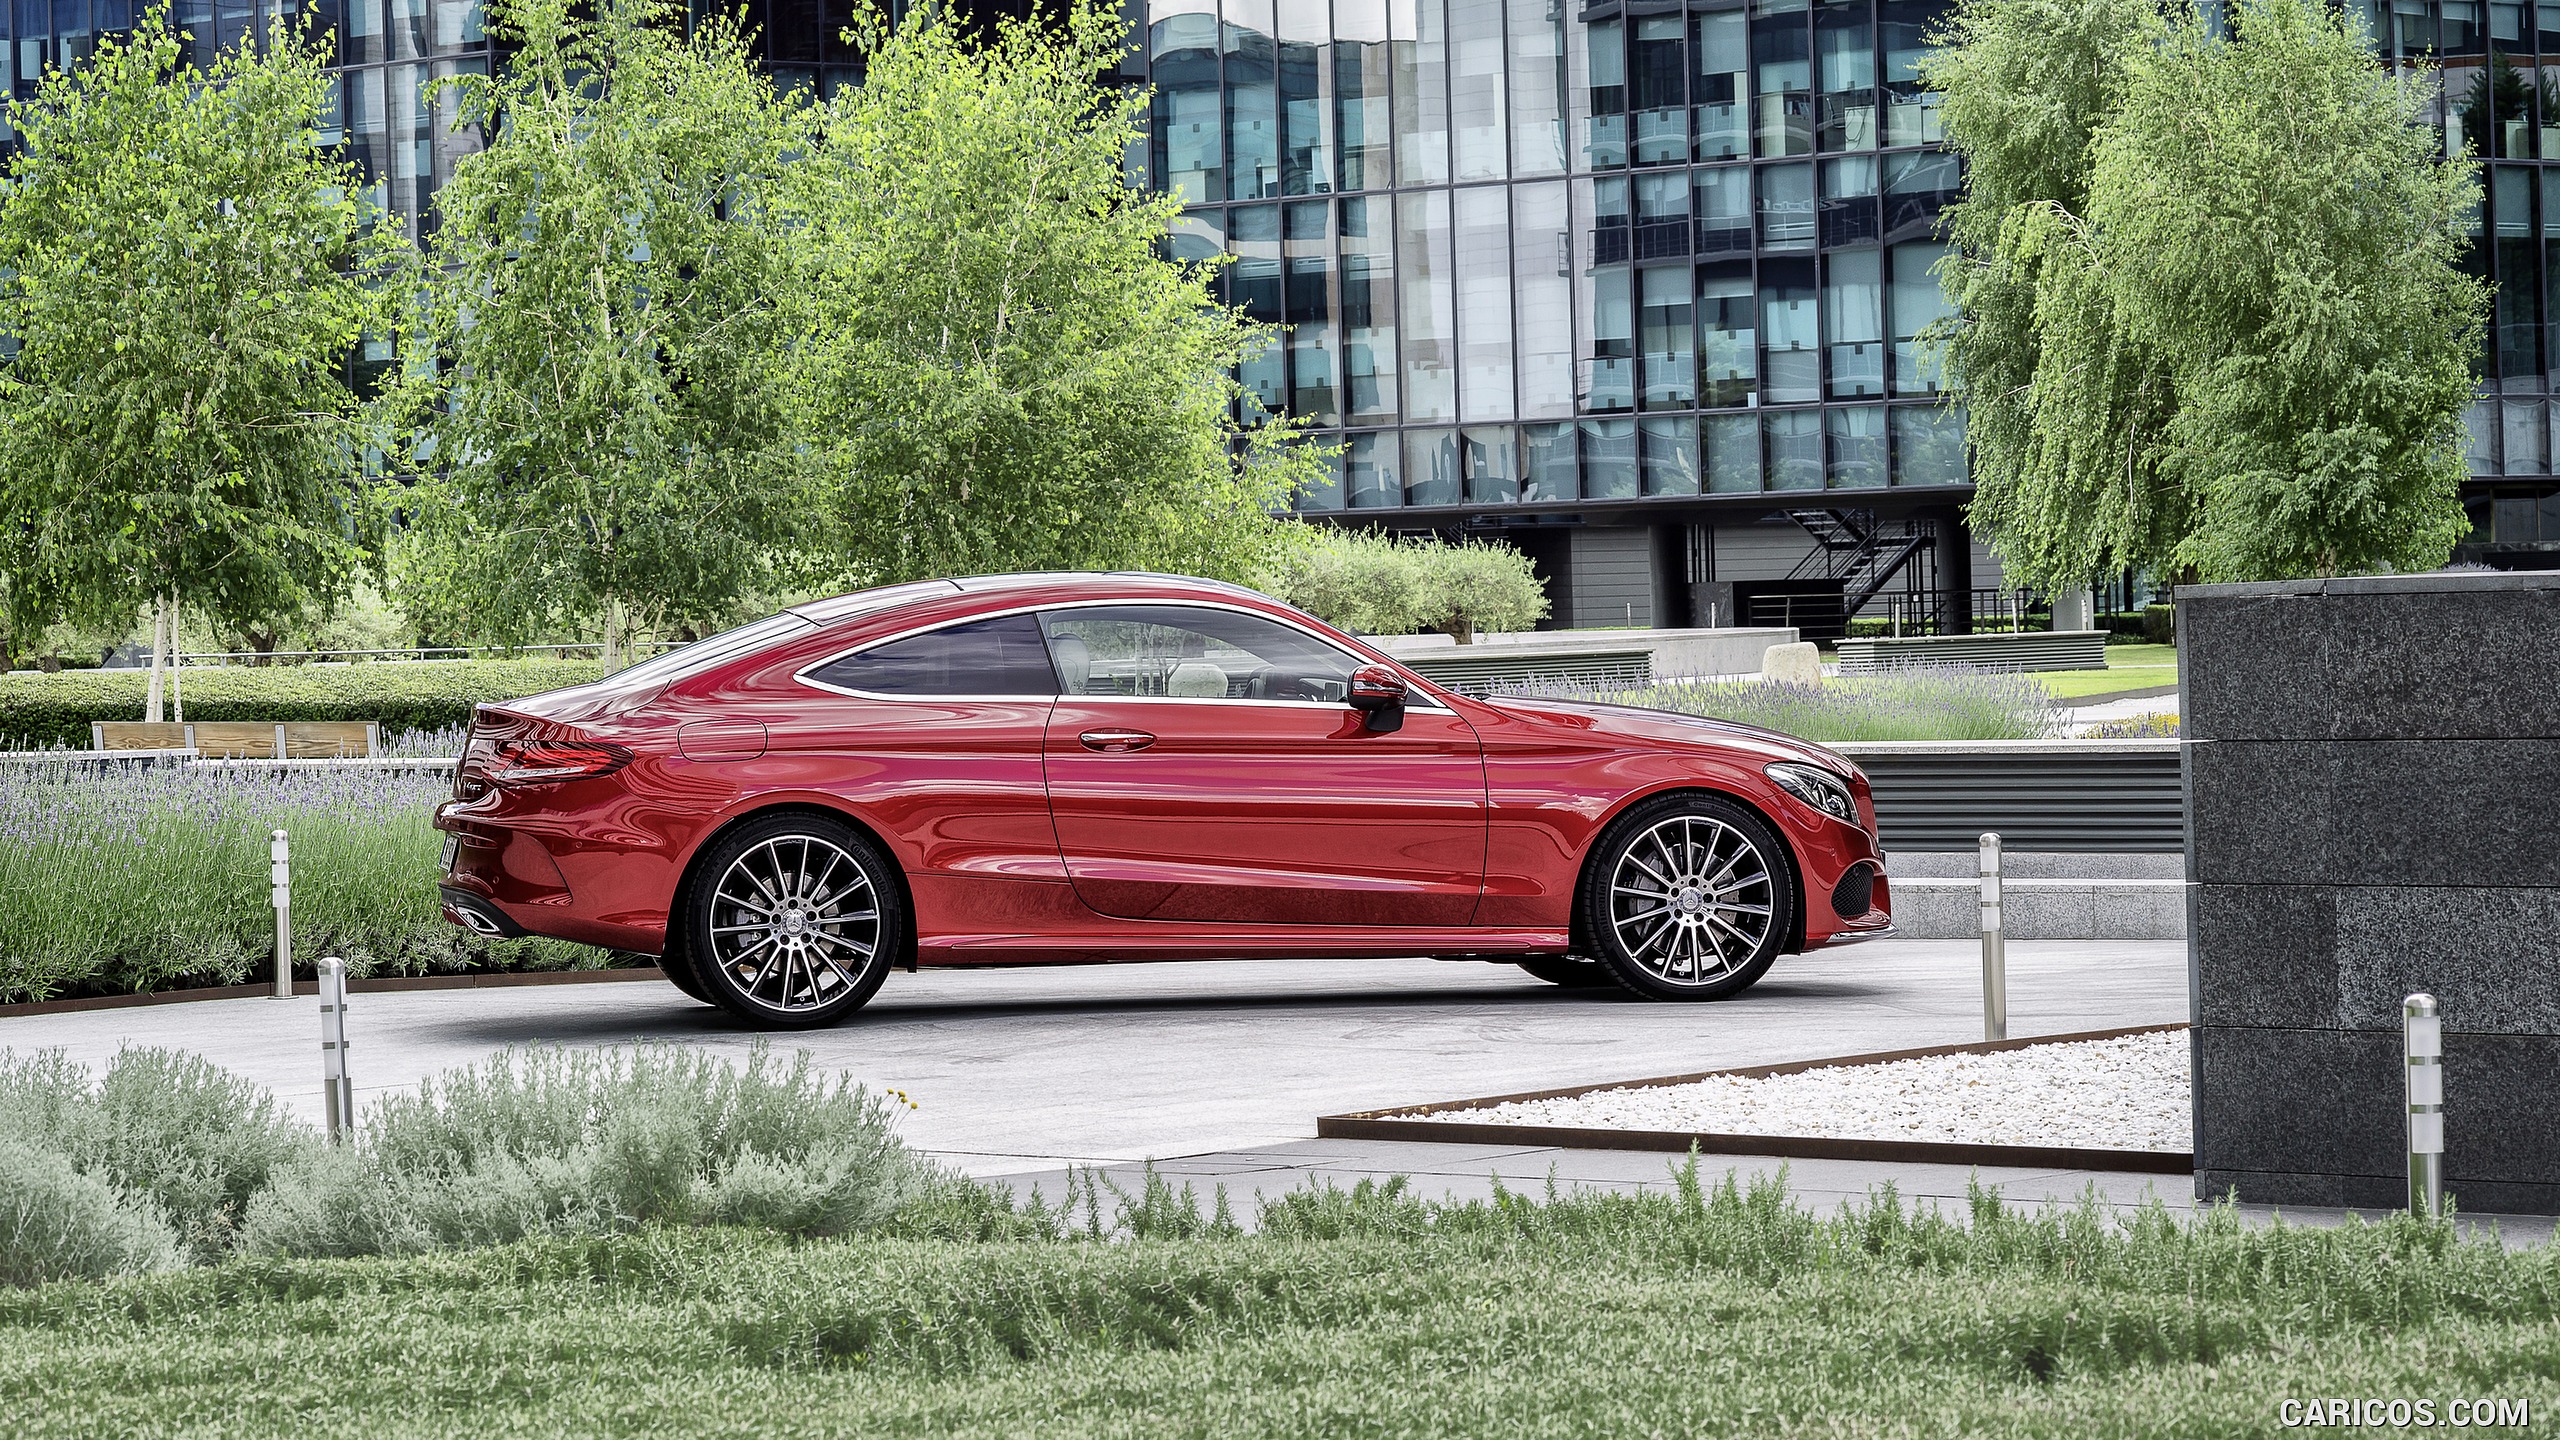 2017 Mercedes-Benz C-Class Coupe C250 d 4MATIC (Hyacinth Red) - Side, #69 of 210